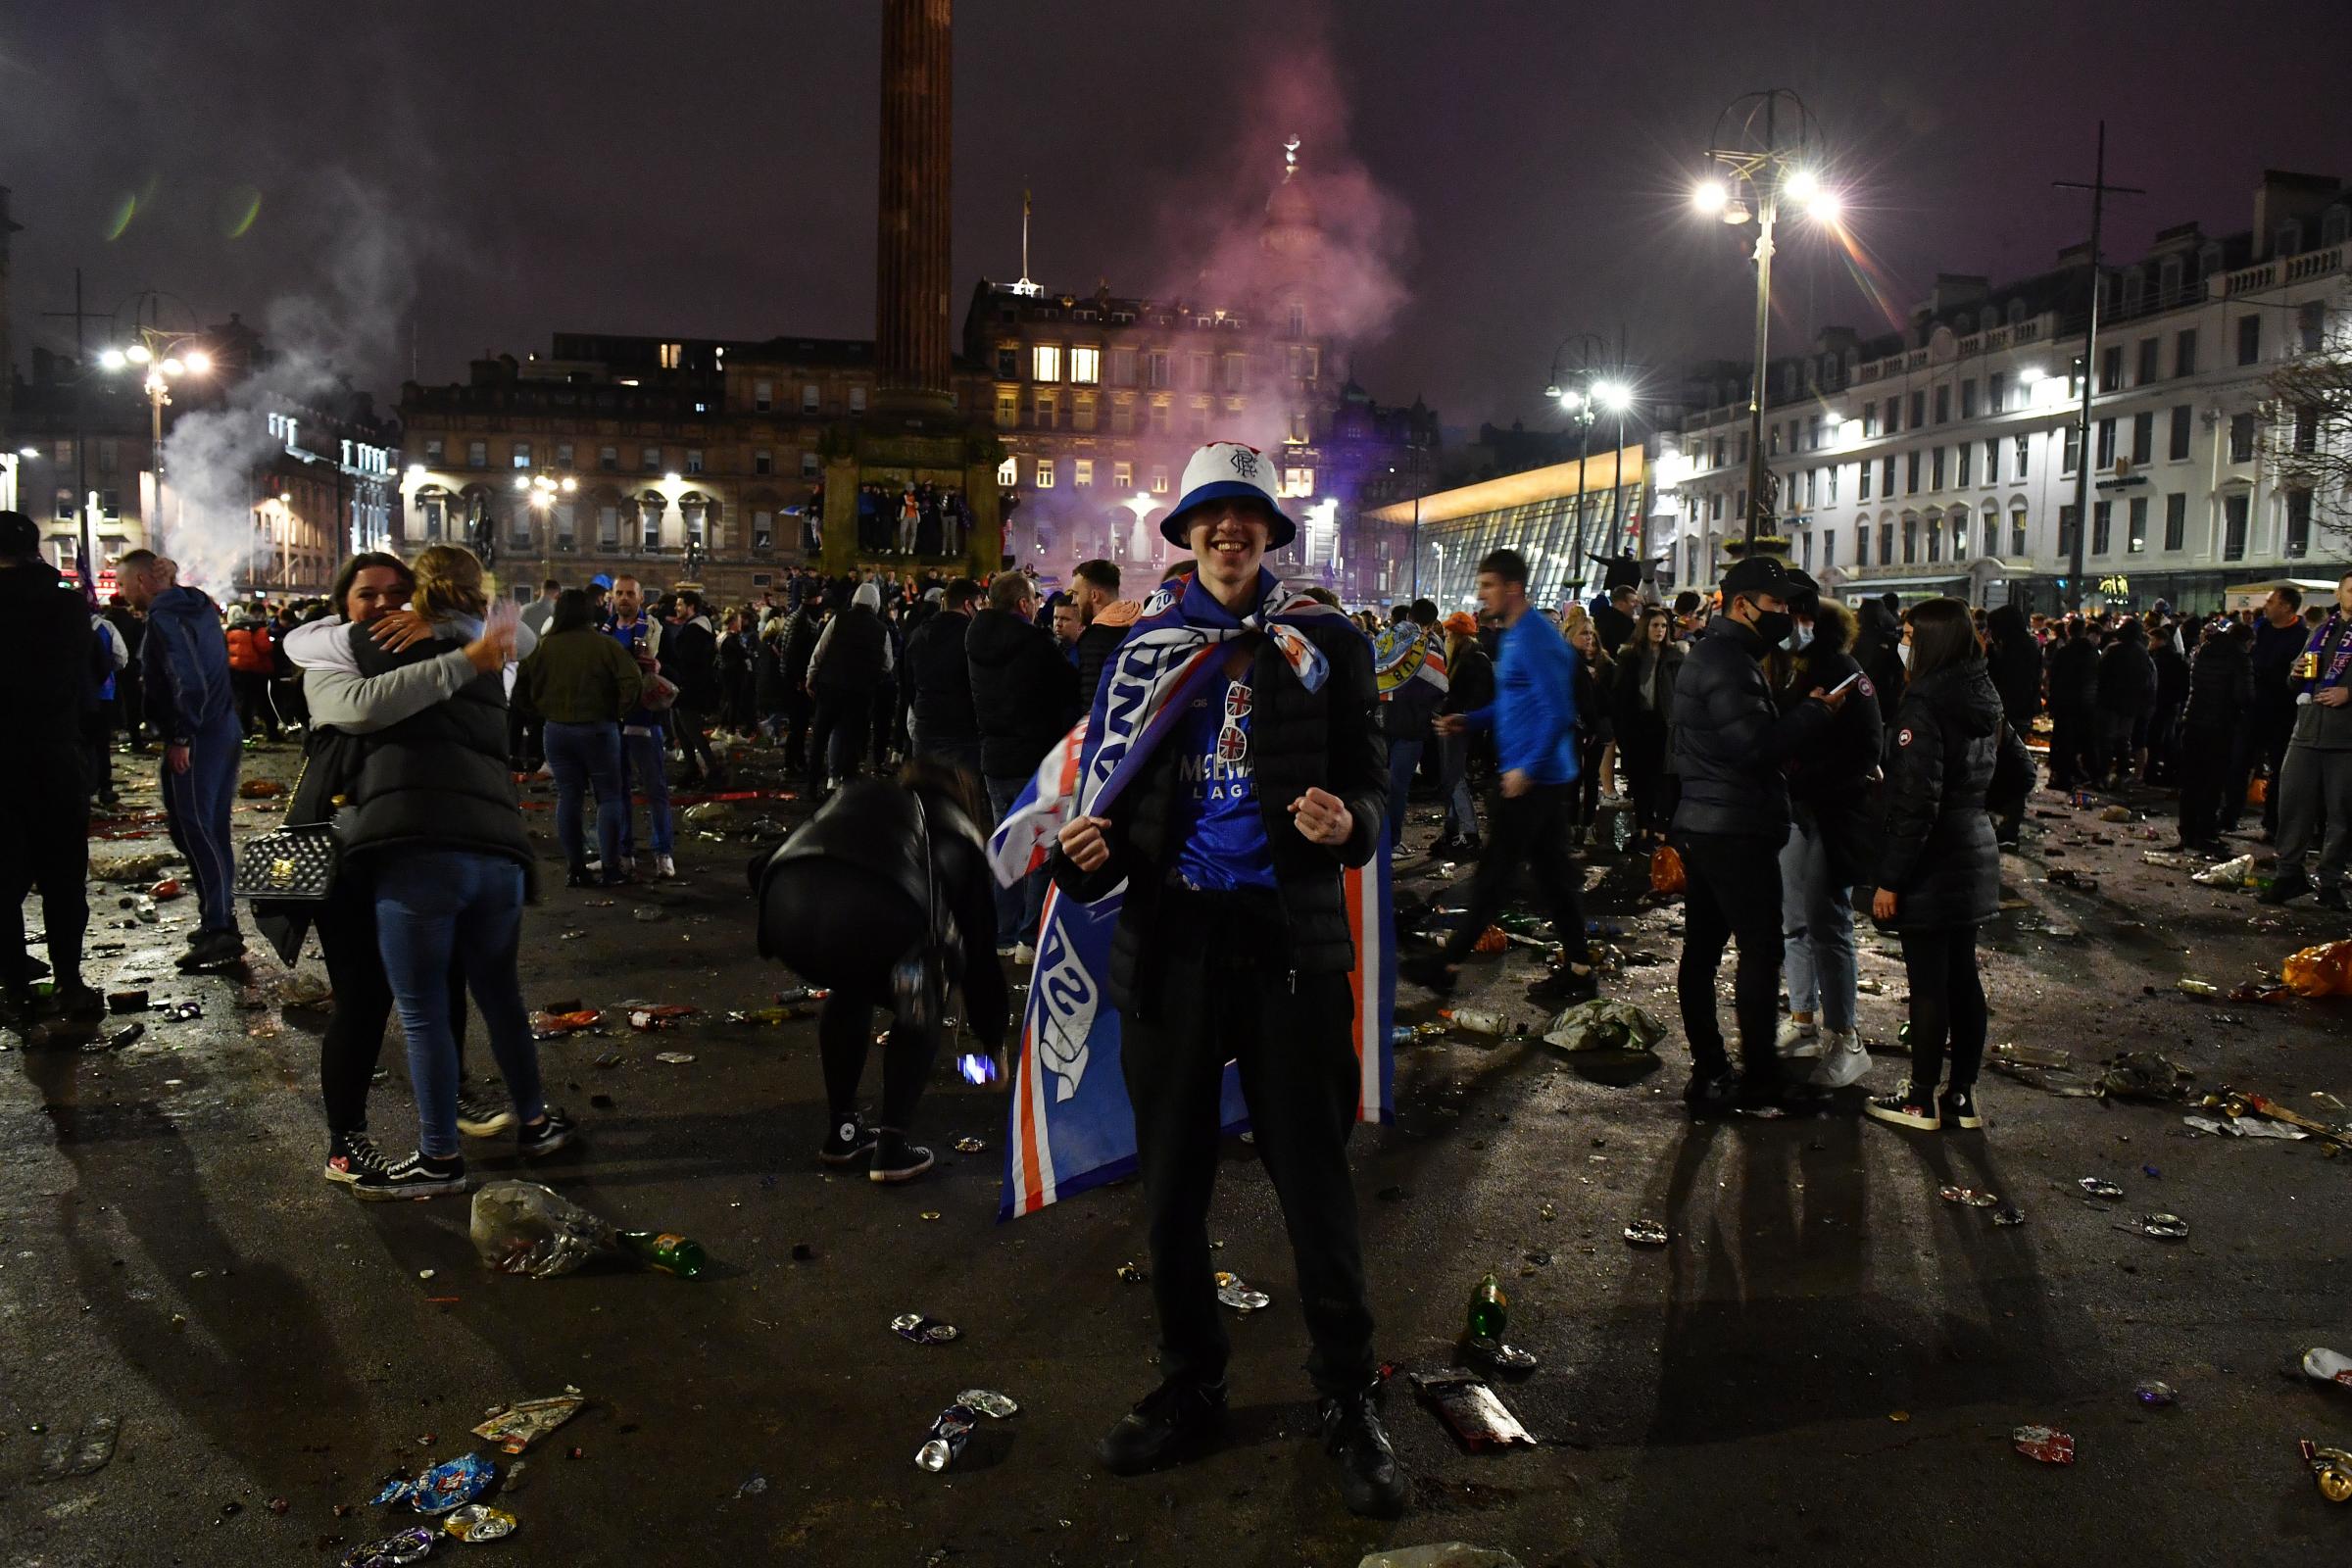 GLASGOW, SCOTLAND - MARCH 07: A fan cheers inside George Square as fans gather to celebrate their team winning the Scottish Premiership title on March 07, 2021 in Glasgow, Scotland. (Photo by Mark Runnacles/Getty Images).